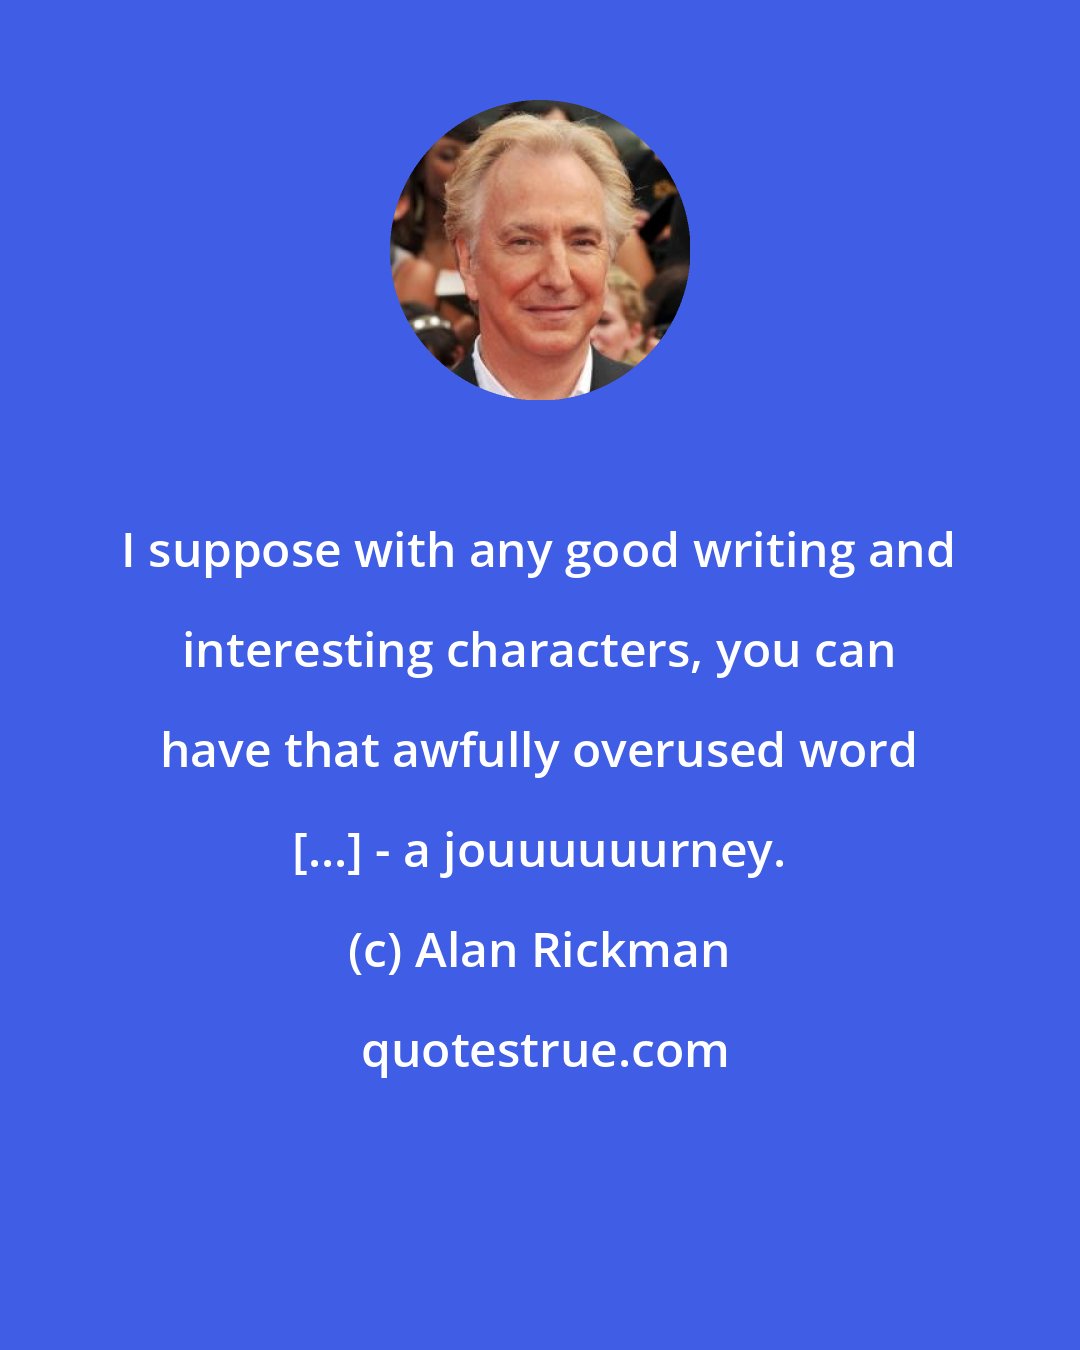 Alan Rickman: I suppose with any good writing and interesting characters, you can have that awfully overused word [...] - a jouuuuuurney.